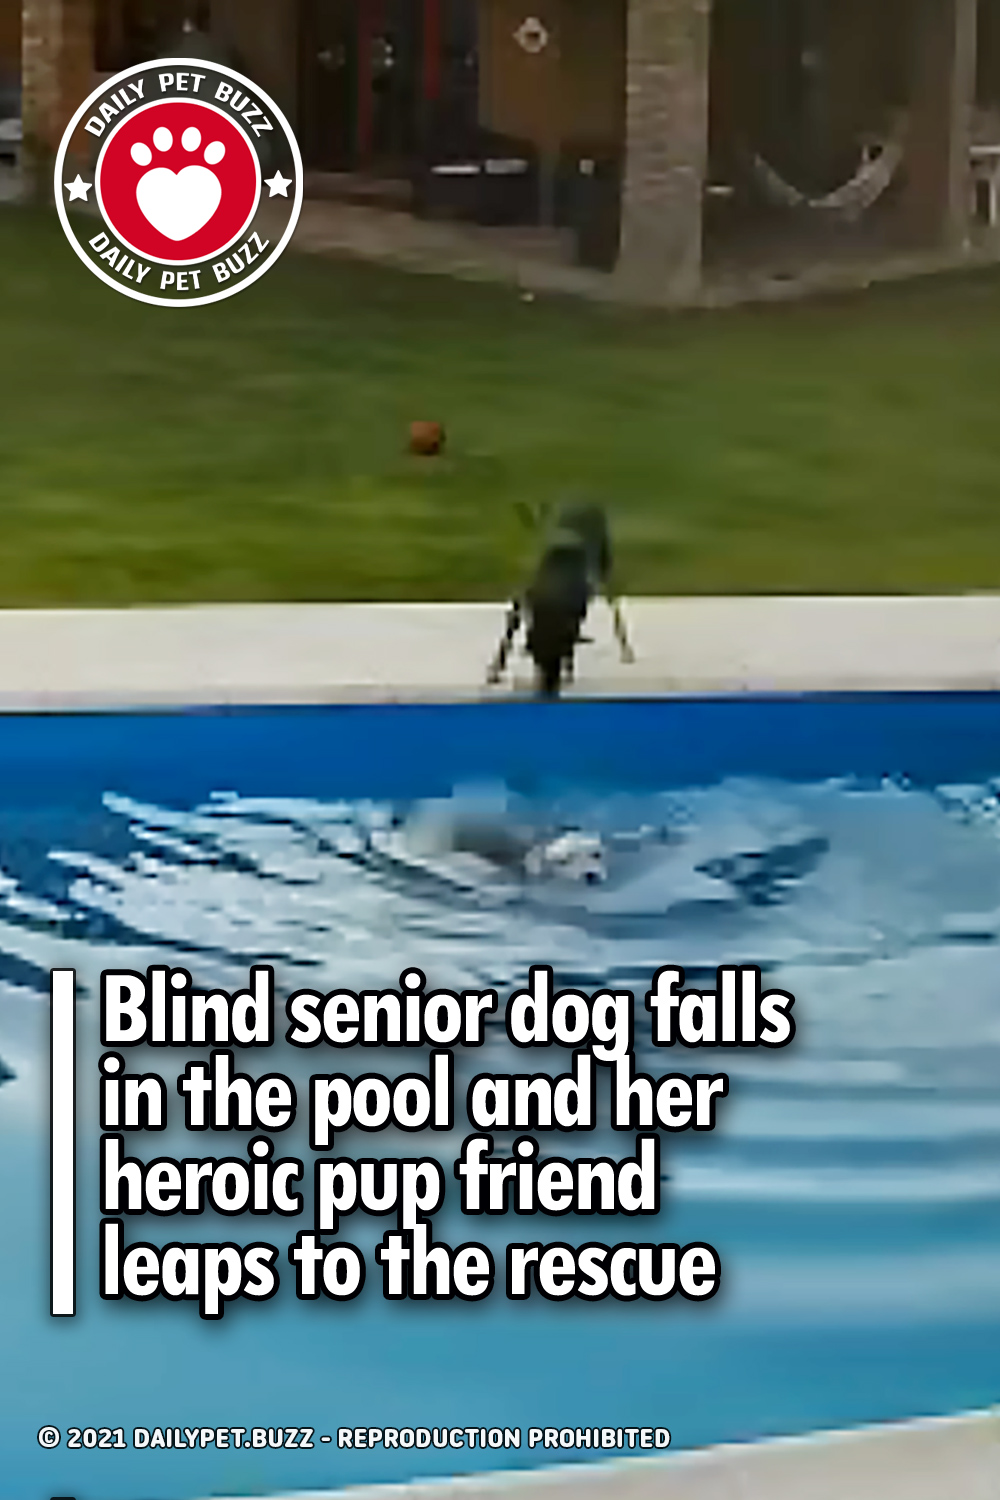 Blind senior dog falls in the pool and her heroic pup friend leaps to the rescue